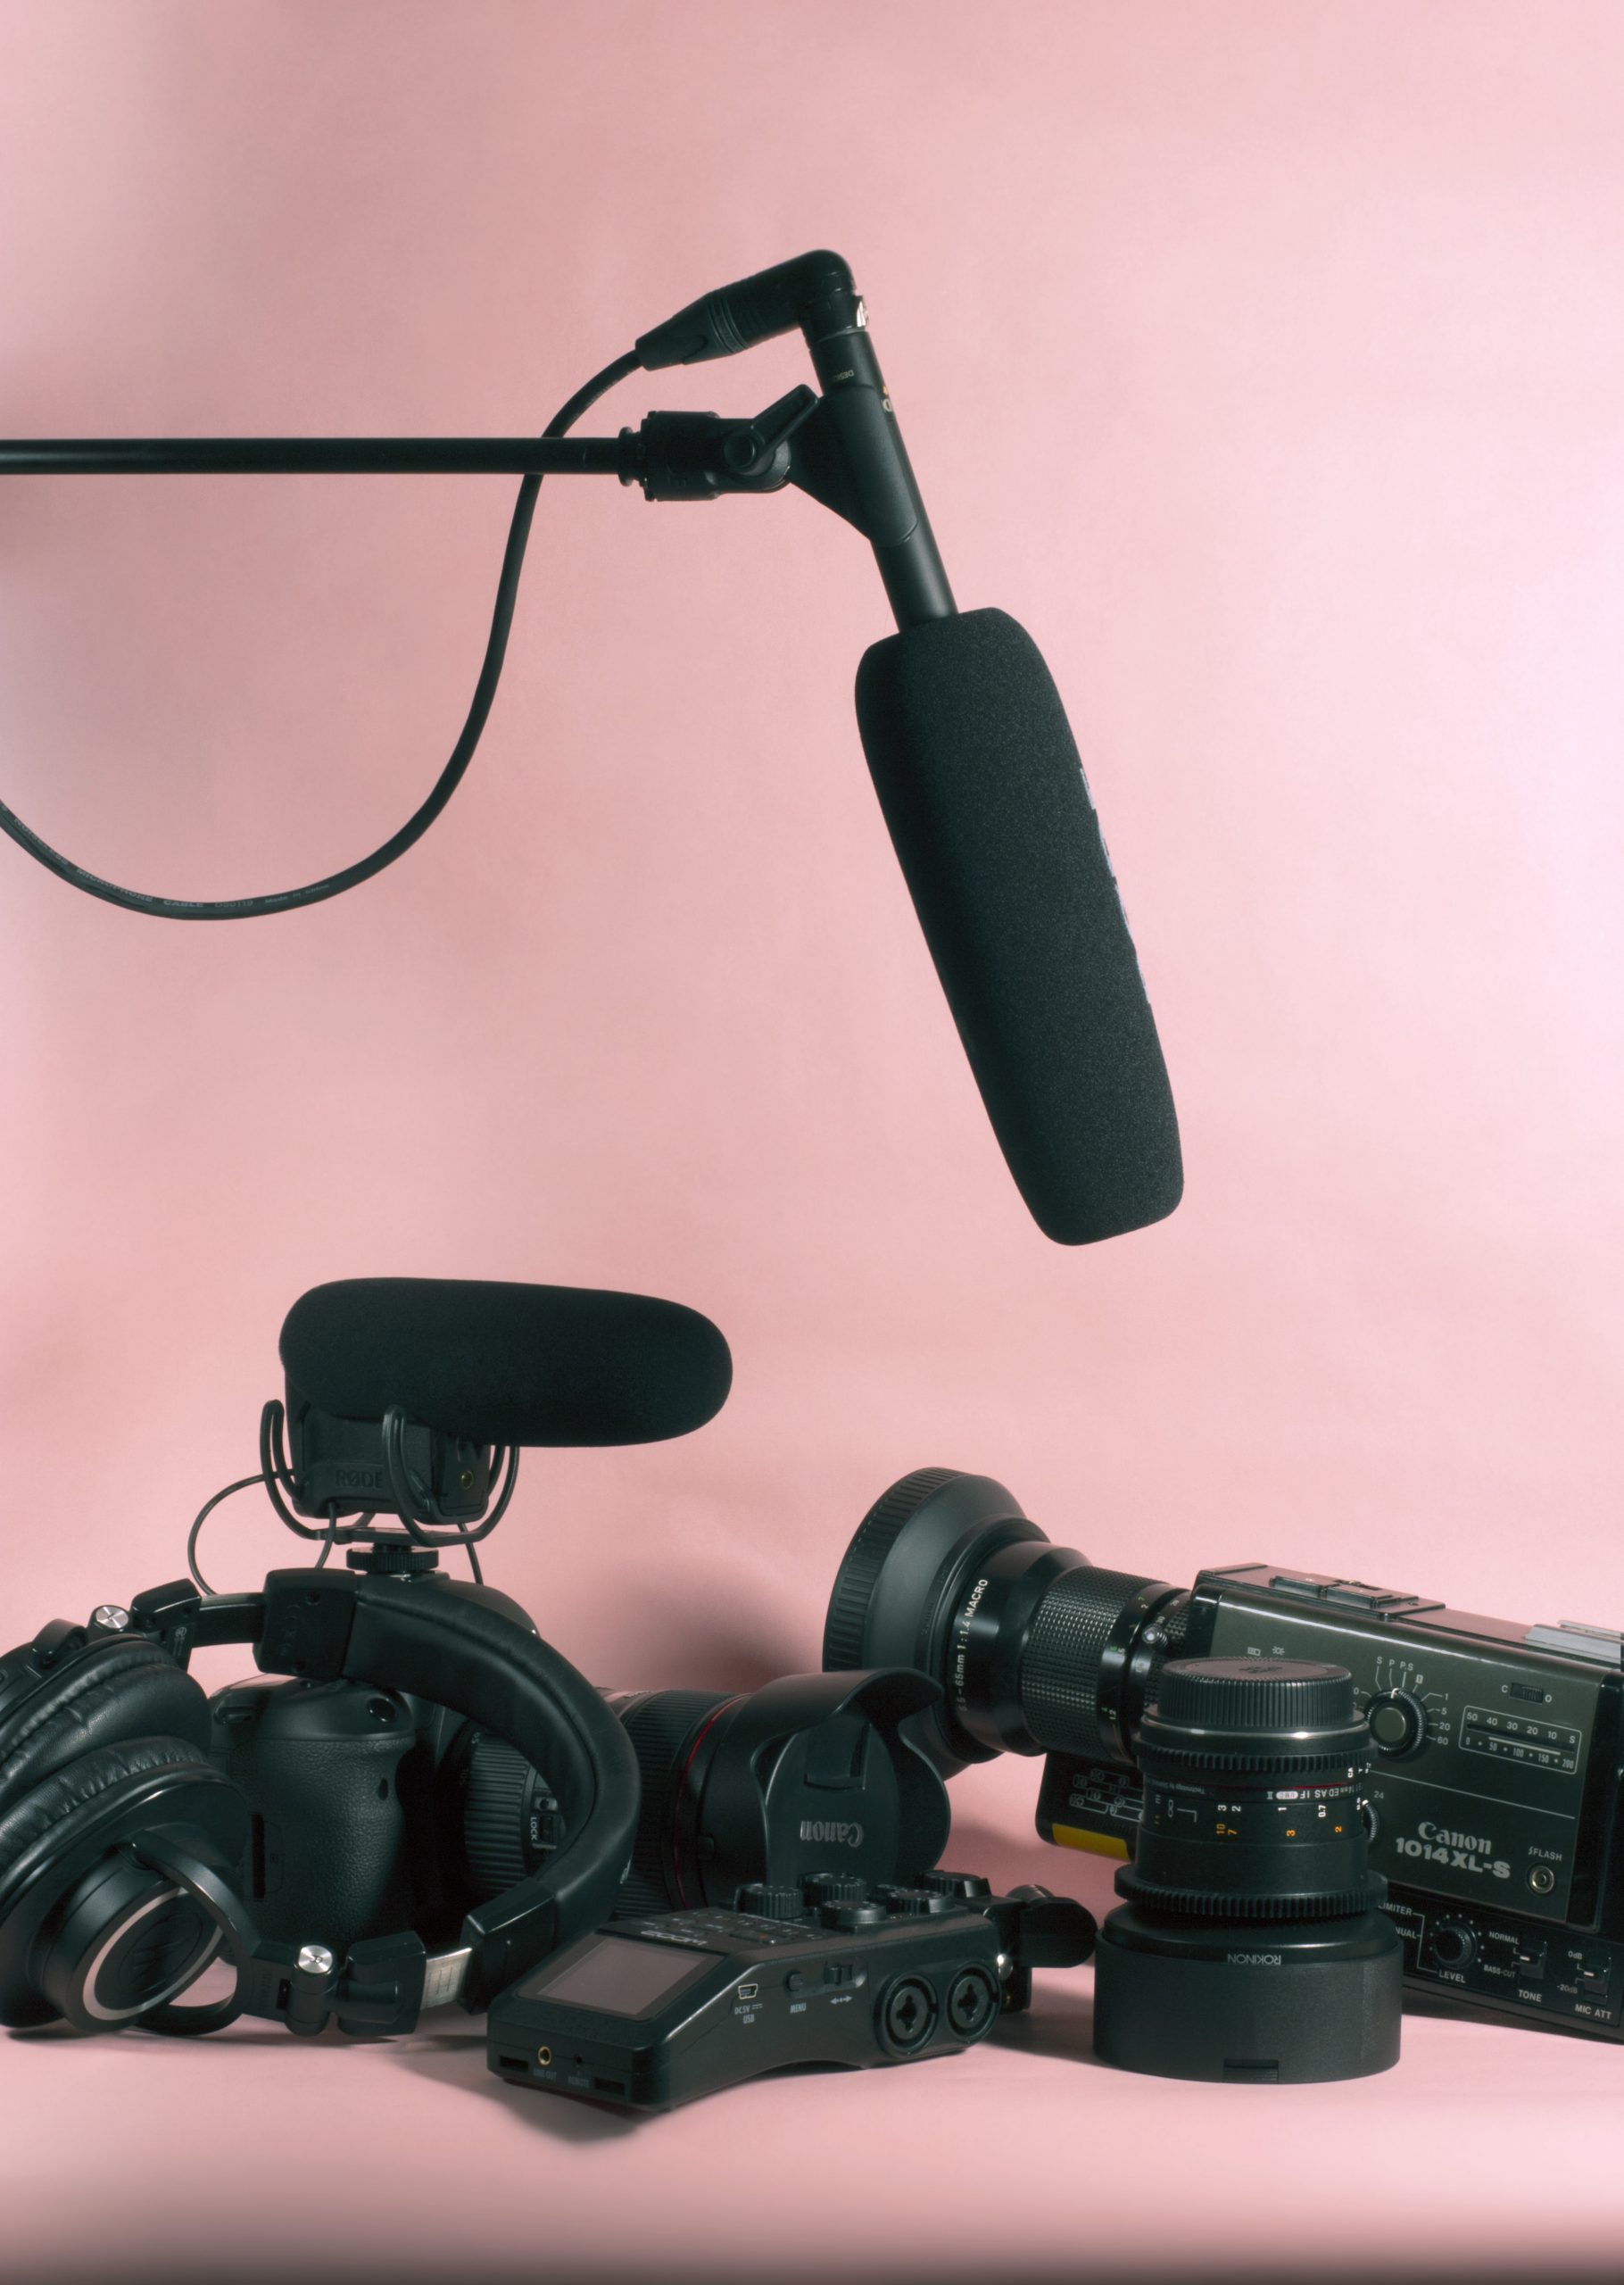 A heap of video and audio equipment in front of a pink backdrop